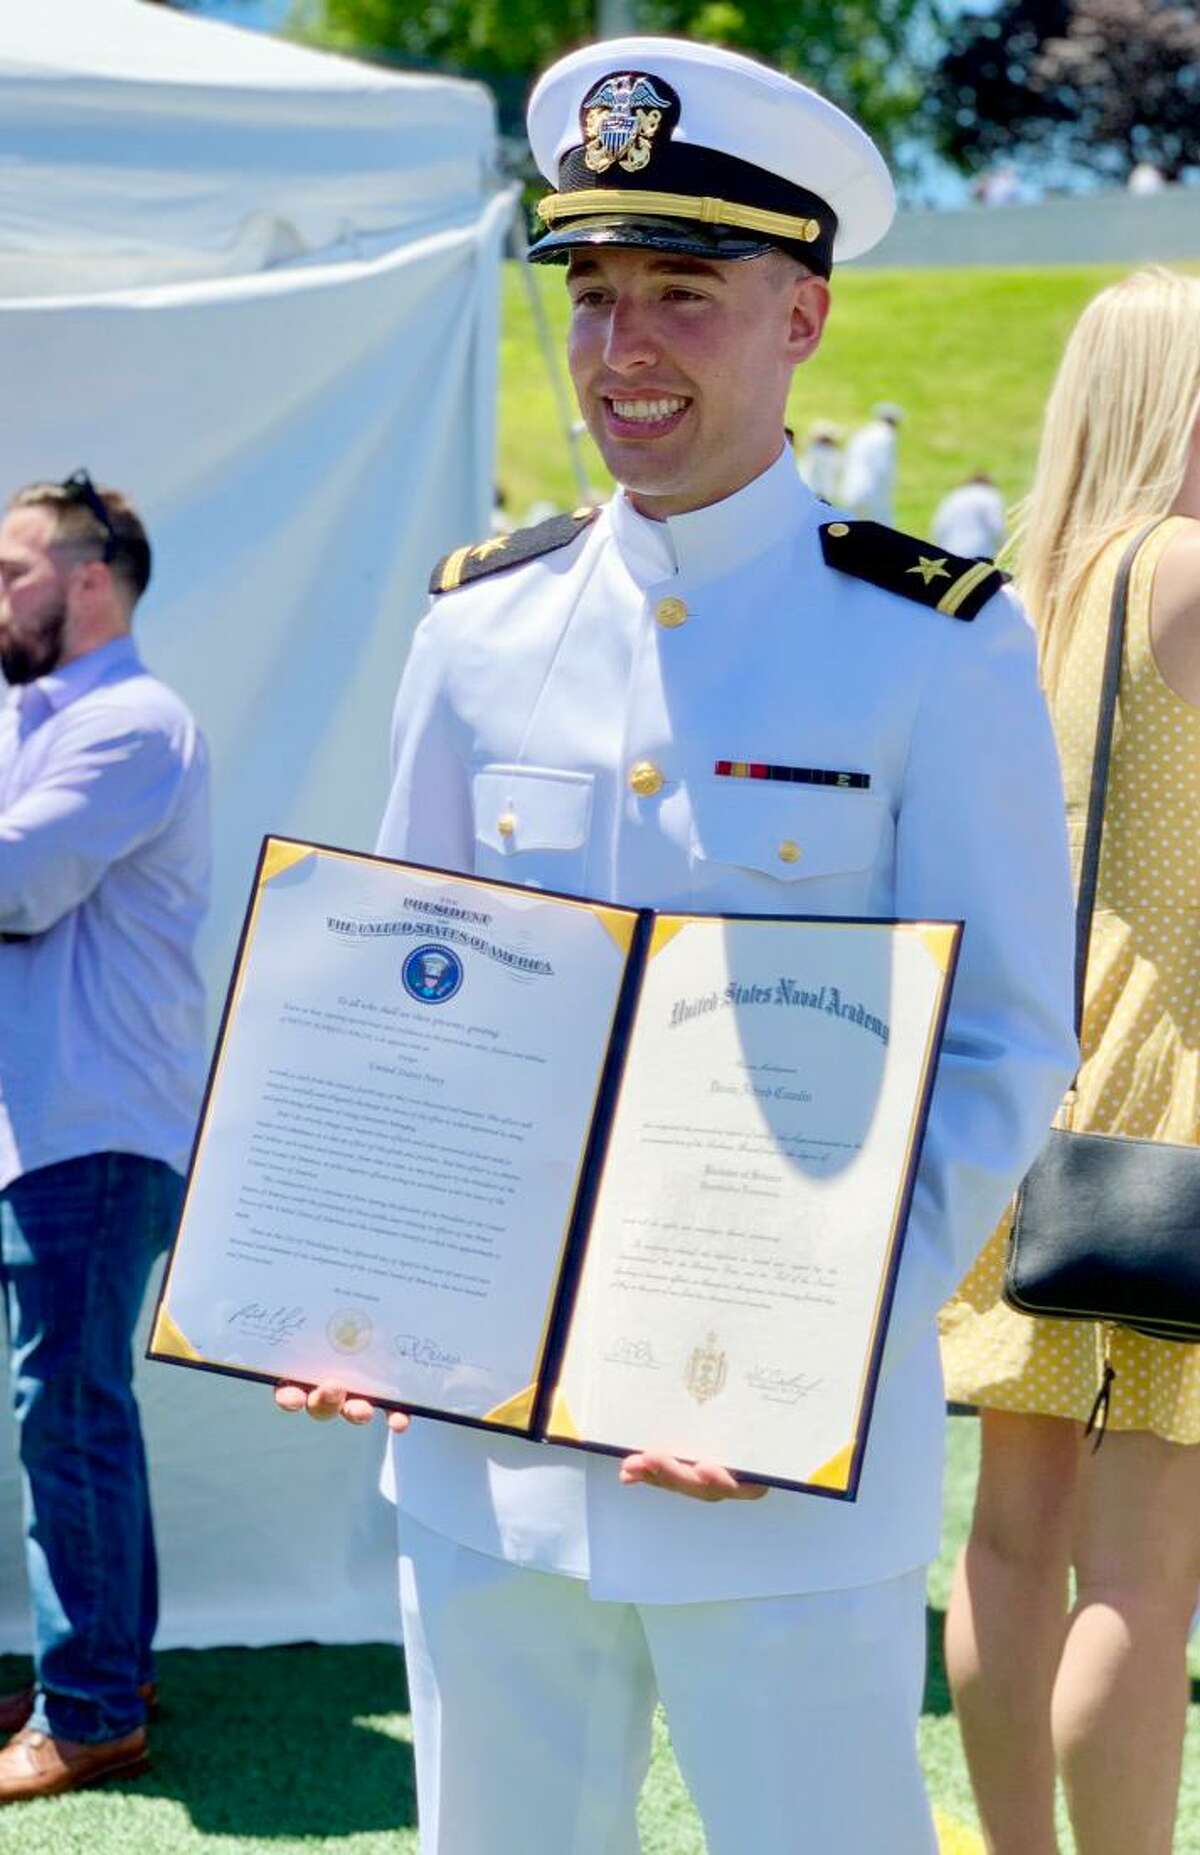 Devin Alfred Camlin, a Stamford native, graduated from the U.S. Naval Academy in Annapolis, Maryland with a Bachelor of Science degree in quantitative economics and a commission as a U.S. Navy ensign.